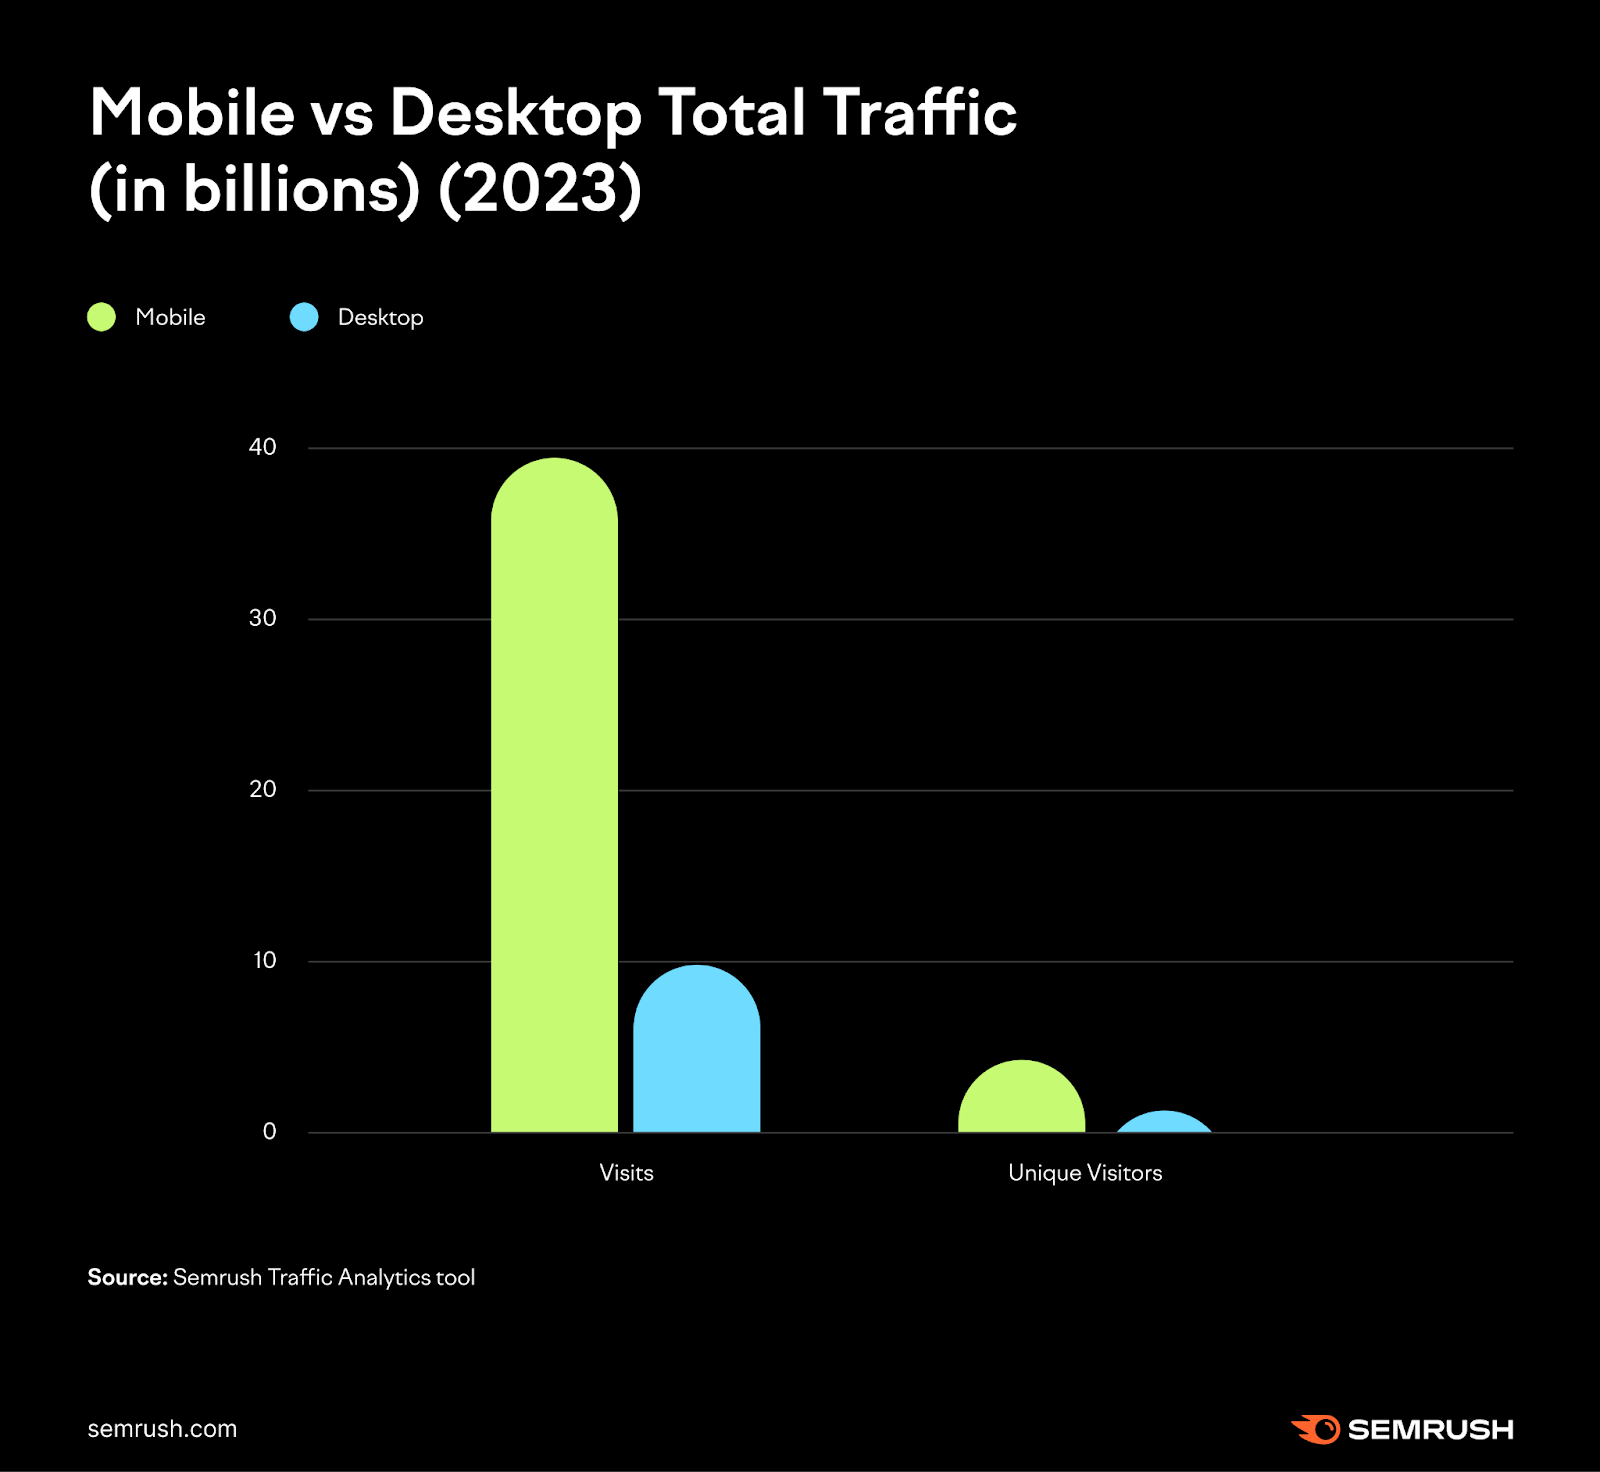 A chart showing mobile vs desktop total traffic in 2023, using data from Traffic Analytics tool